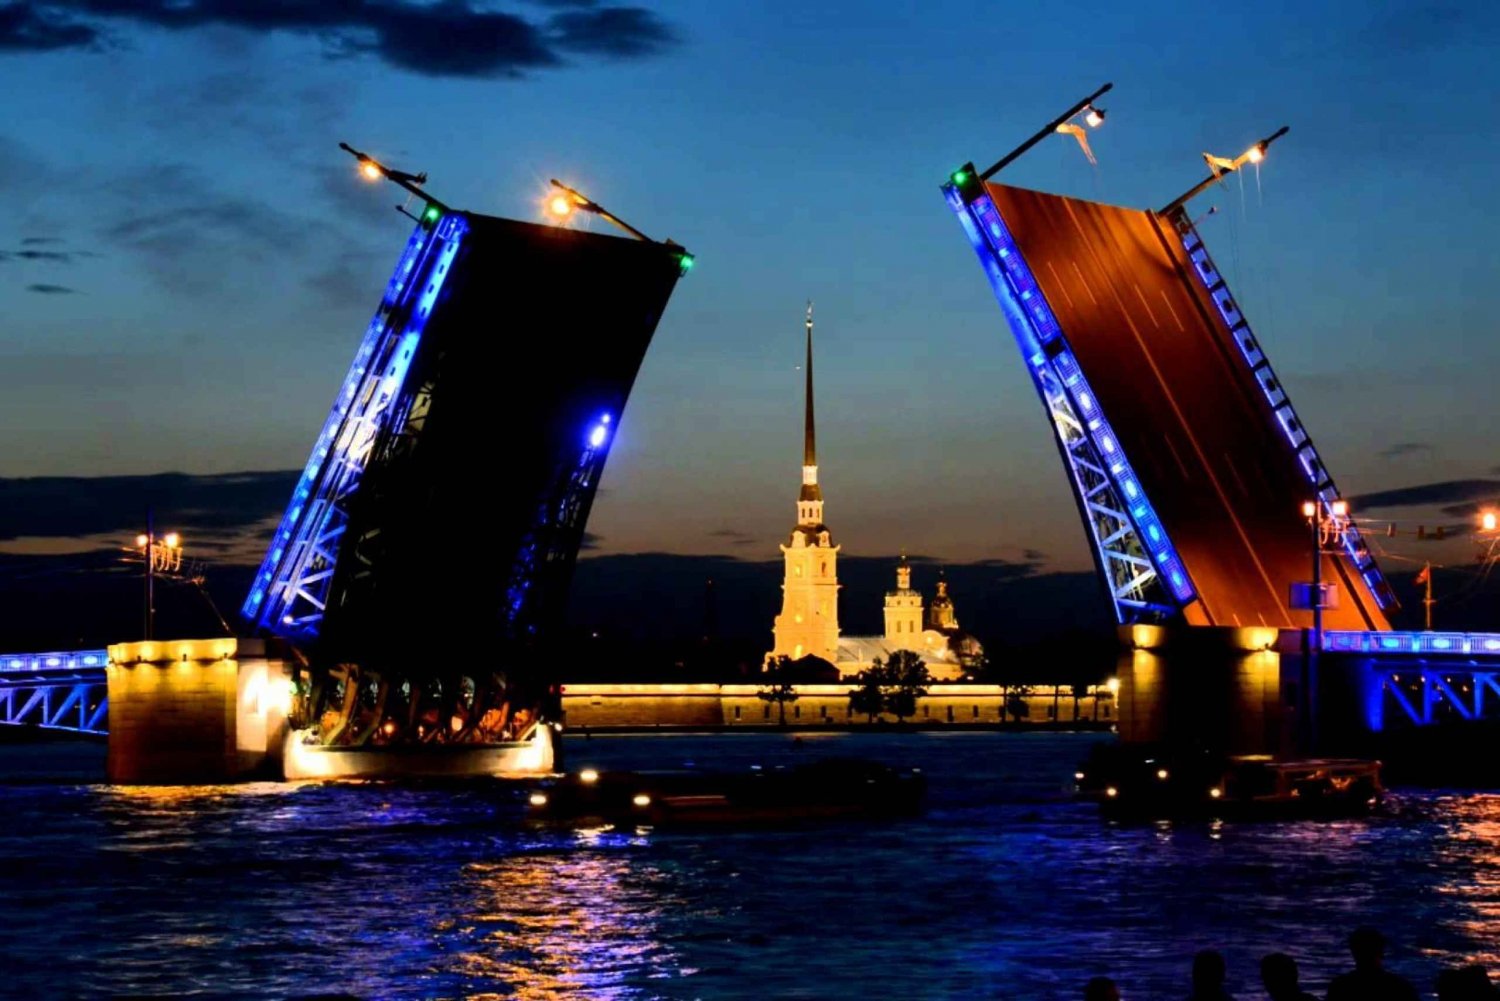 St. Petersburg: Night Cruise Peter and Paul Fortress Visit